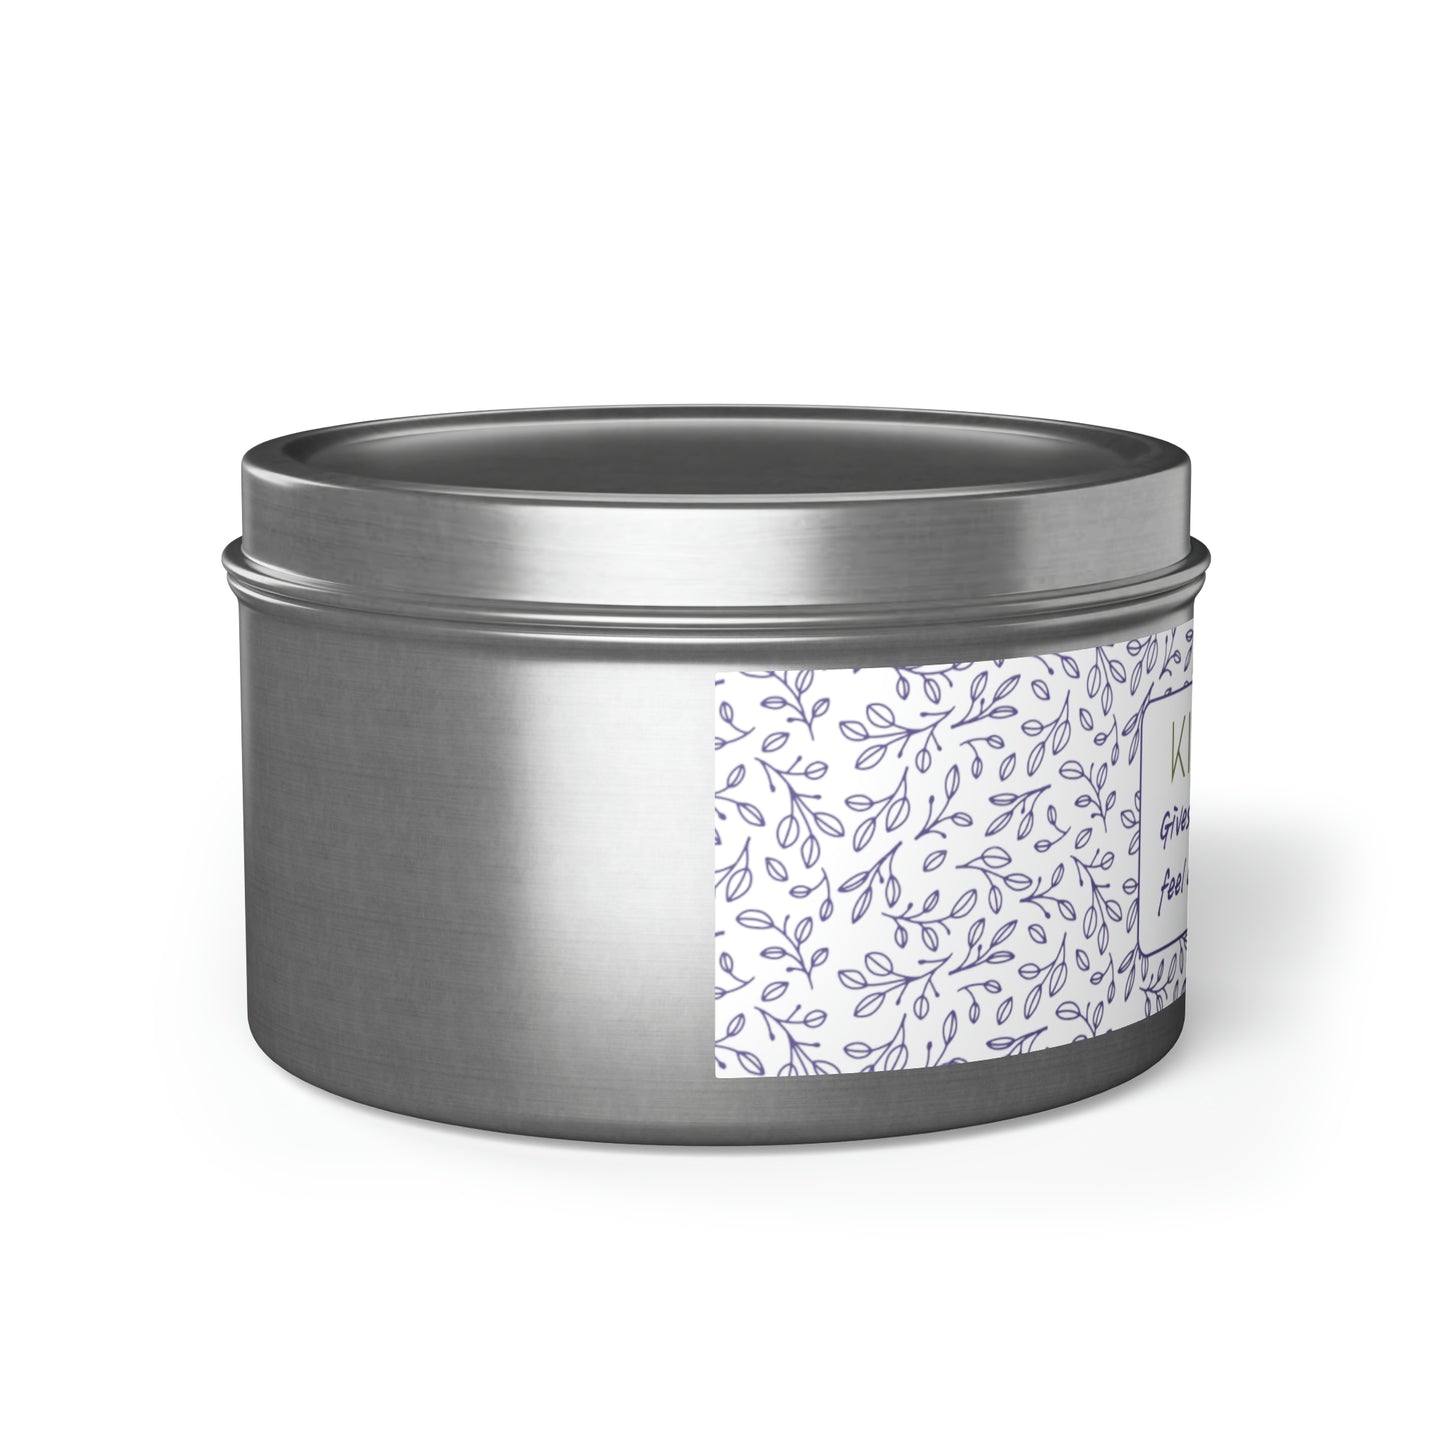 Kindness Gives Hope Tin Candles